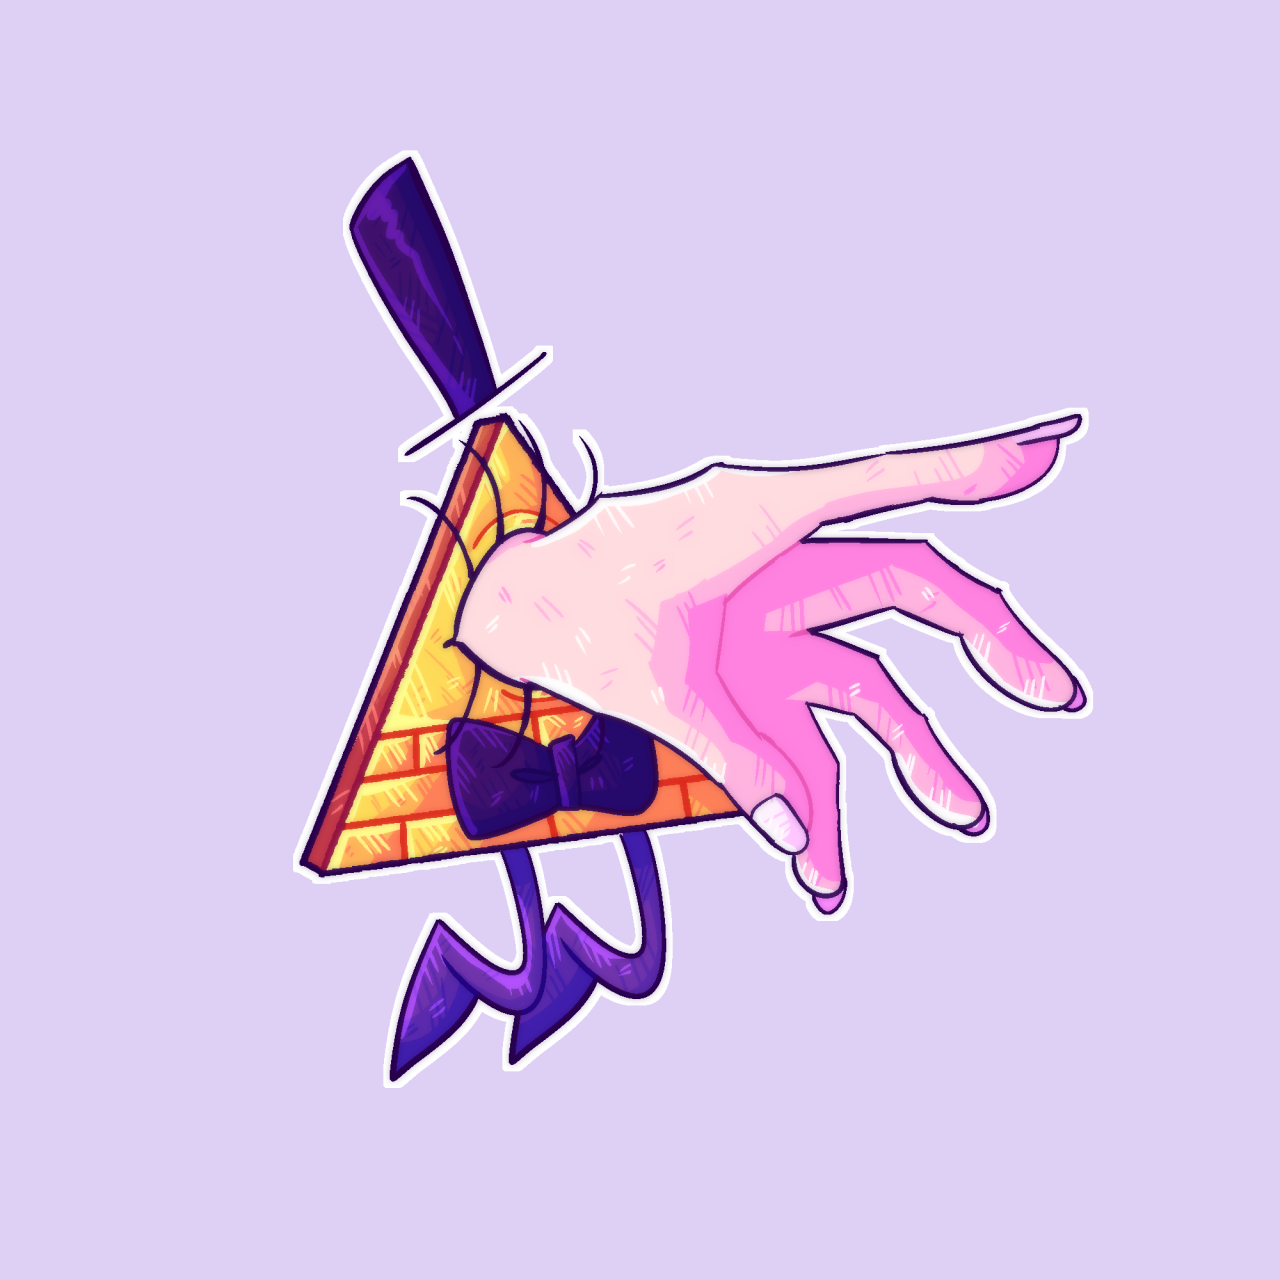 Daily Bill Cipher Doodles — [192] There's a hand coming out of his socket!